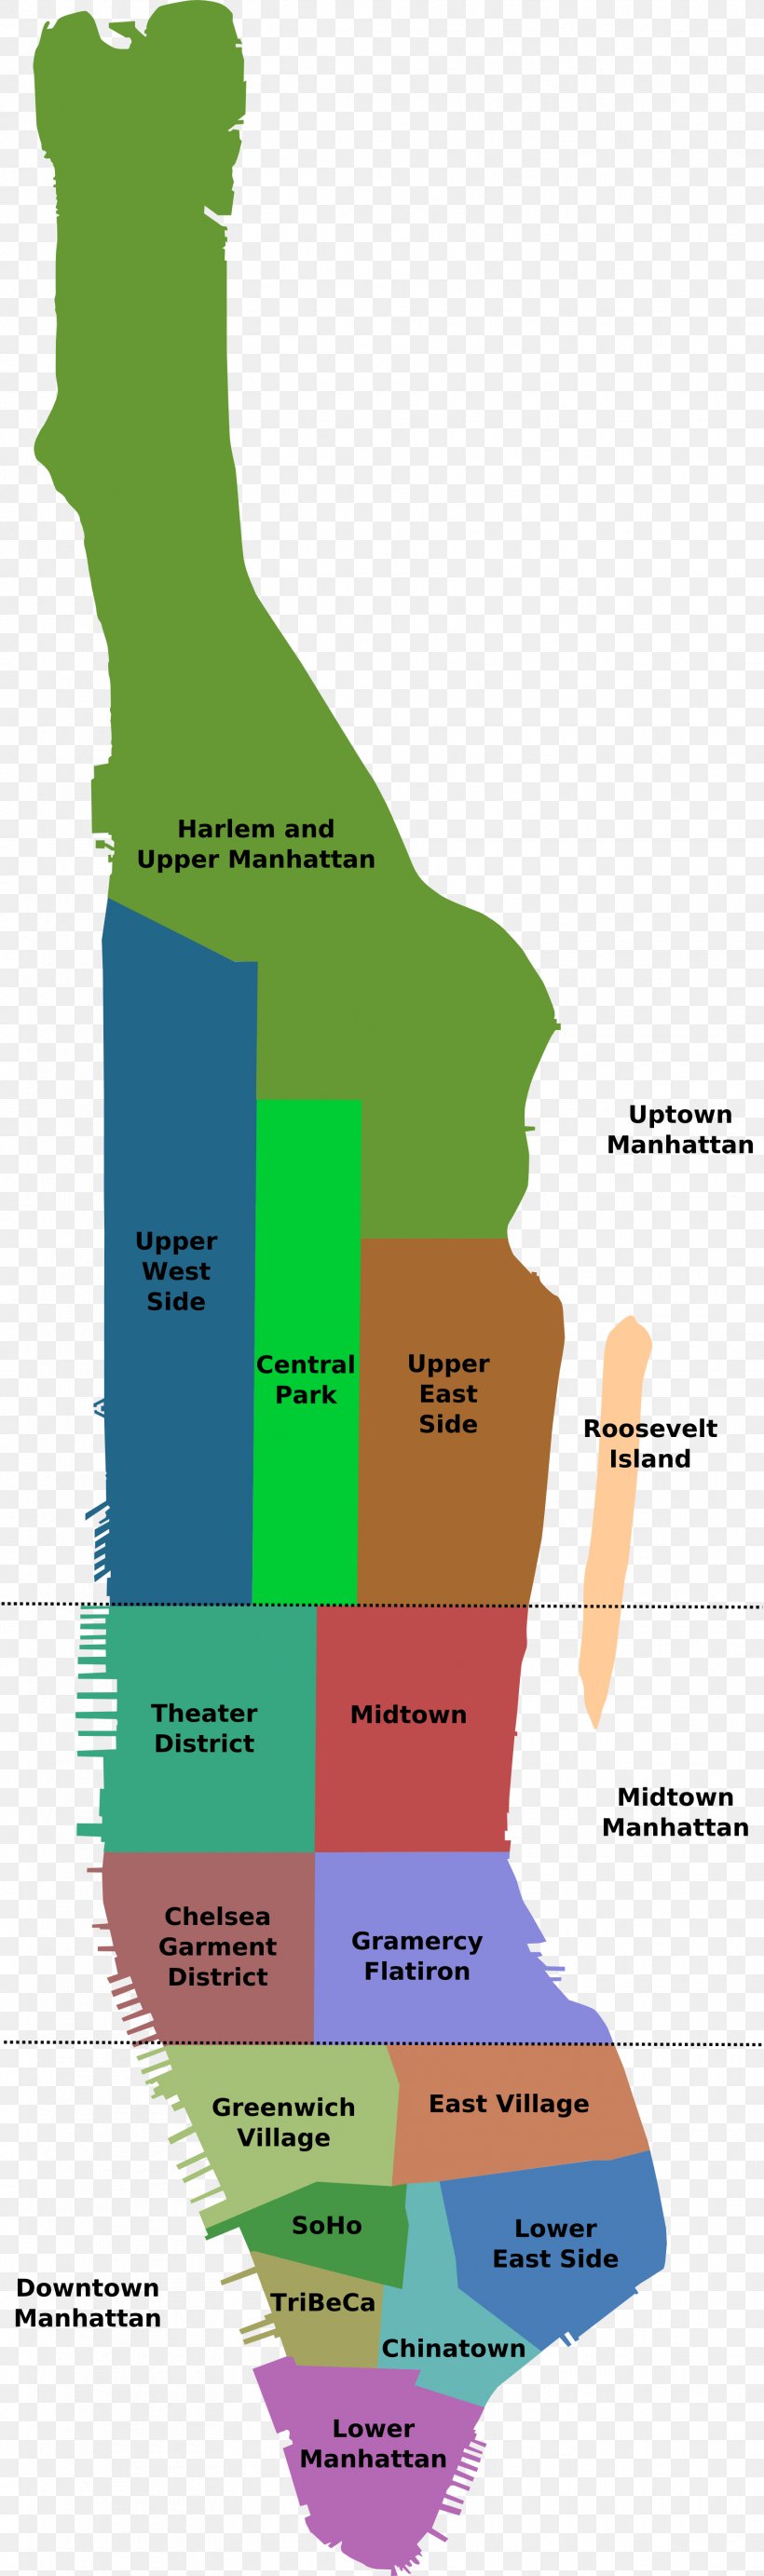 Image Map Manhattan Neighborhood Network District, PNG, 1765x5955px, 2009, Map, Area, Diagram, District Download Free